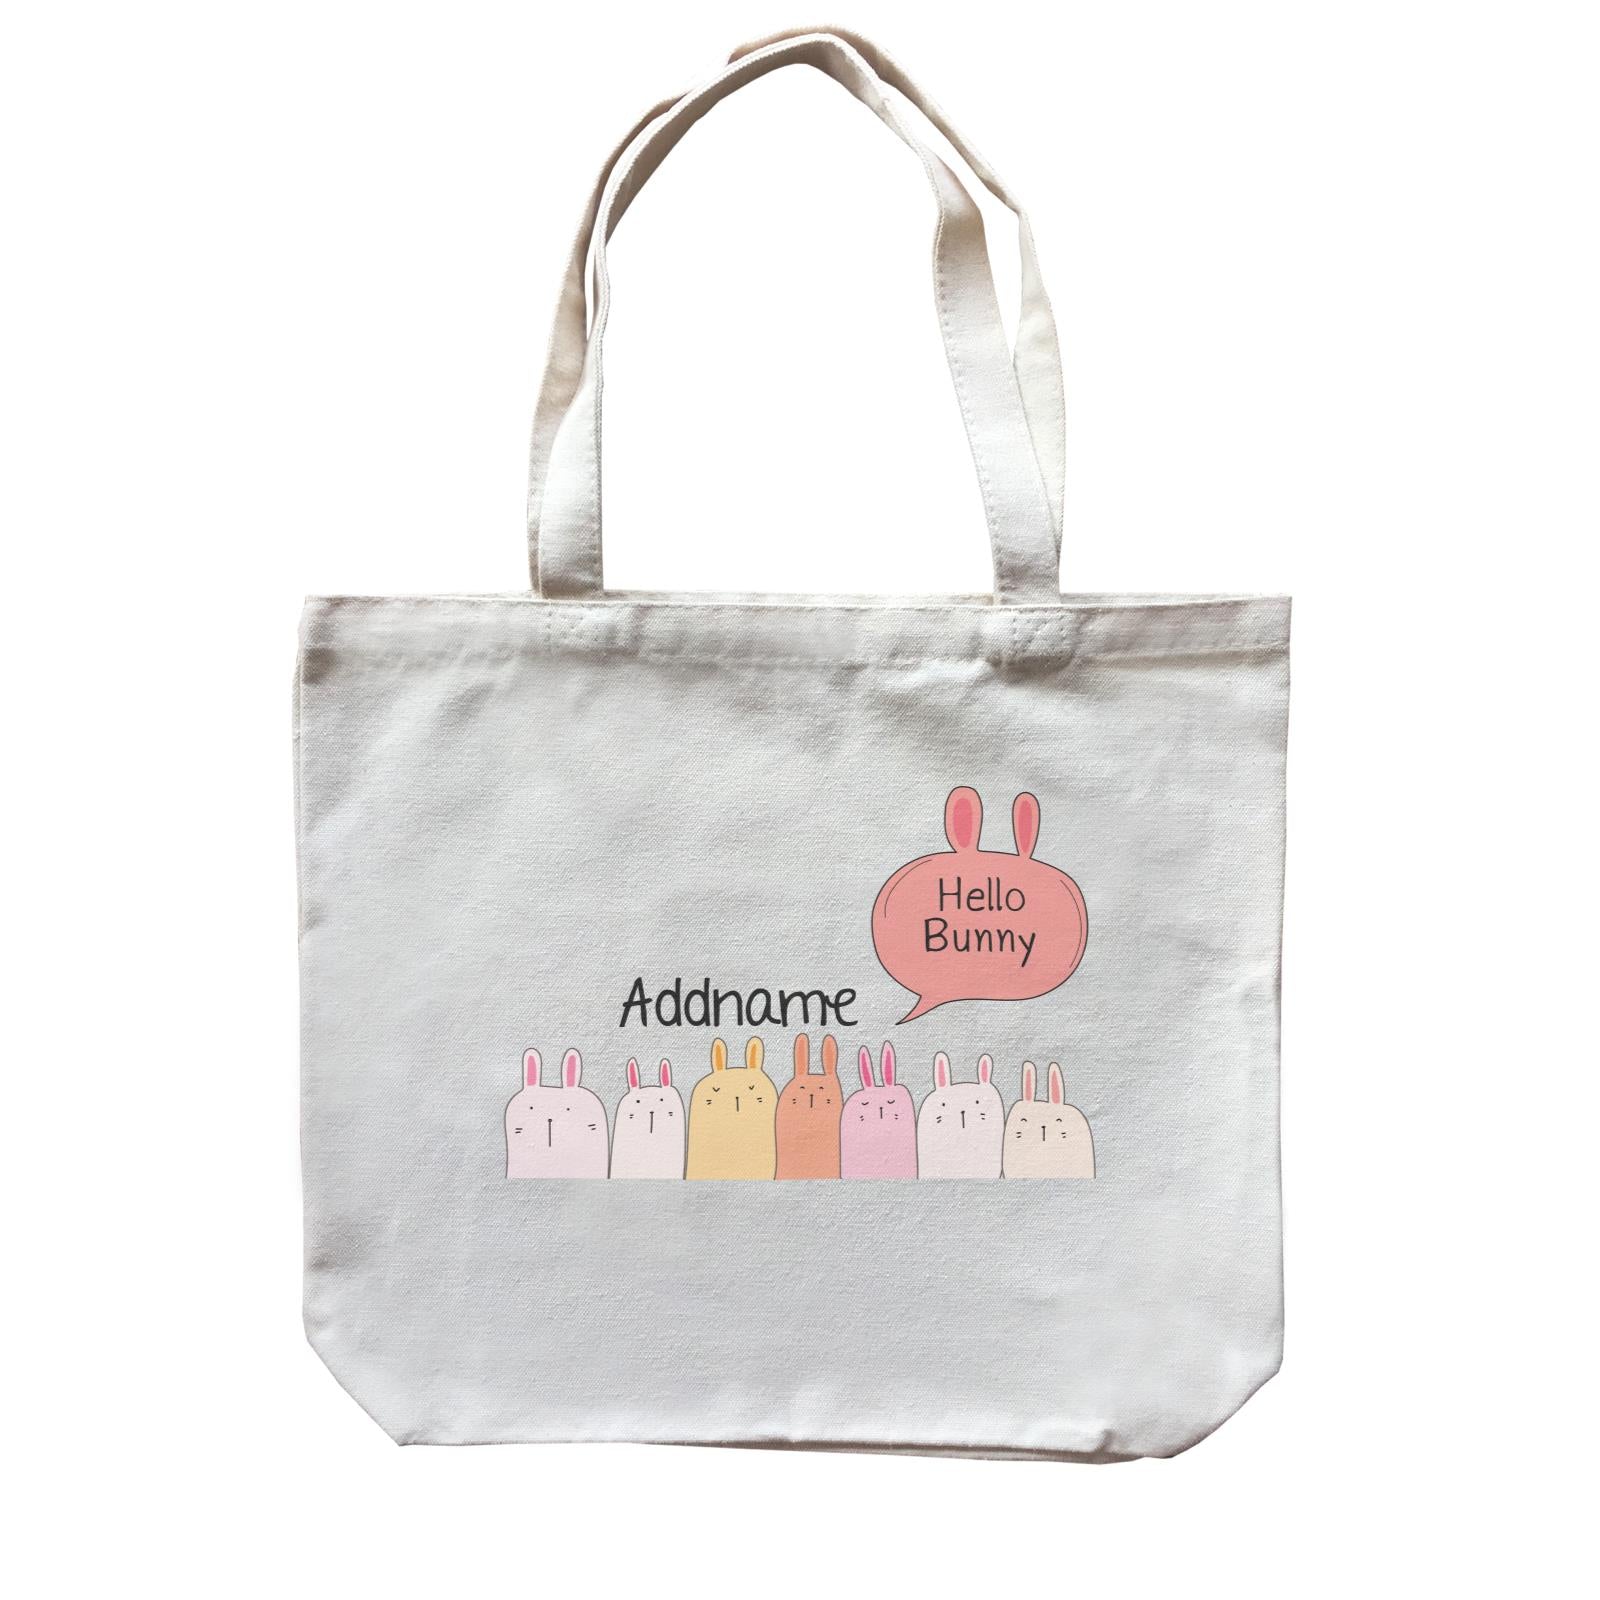 Cute Animals And Friends Series Hello Bunny Group Addname Canvas Bag